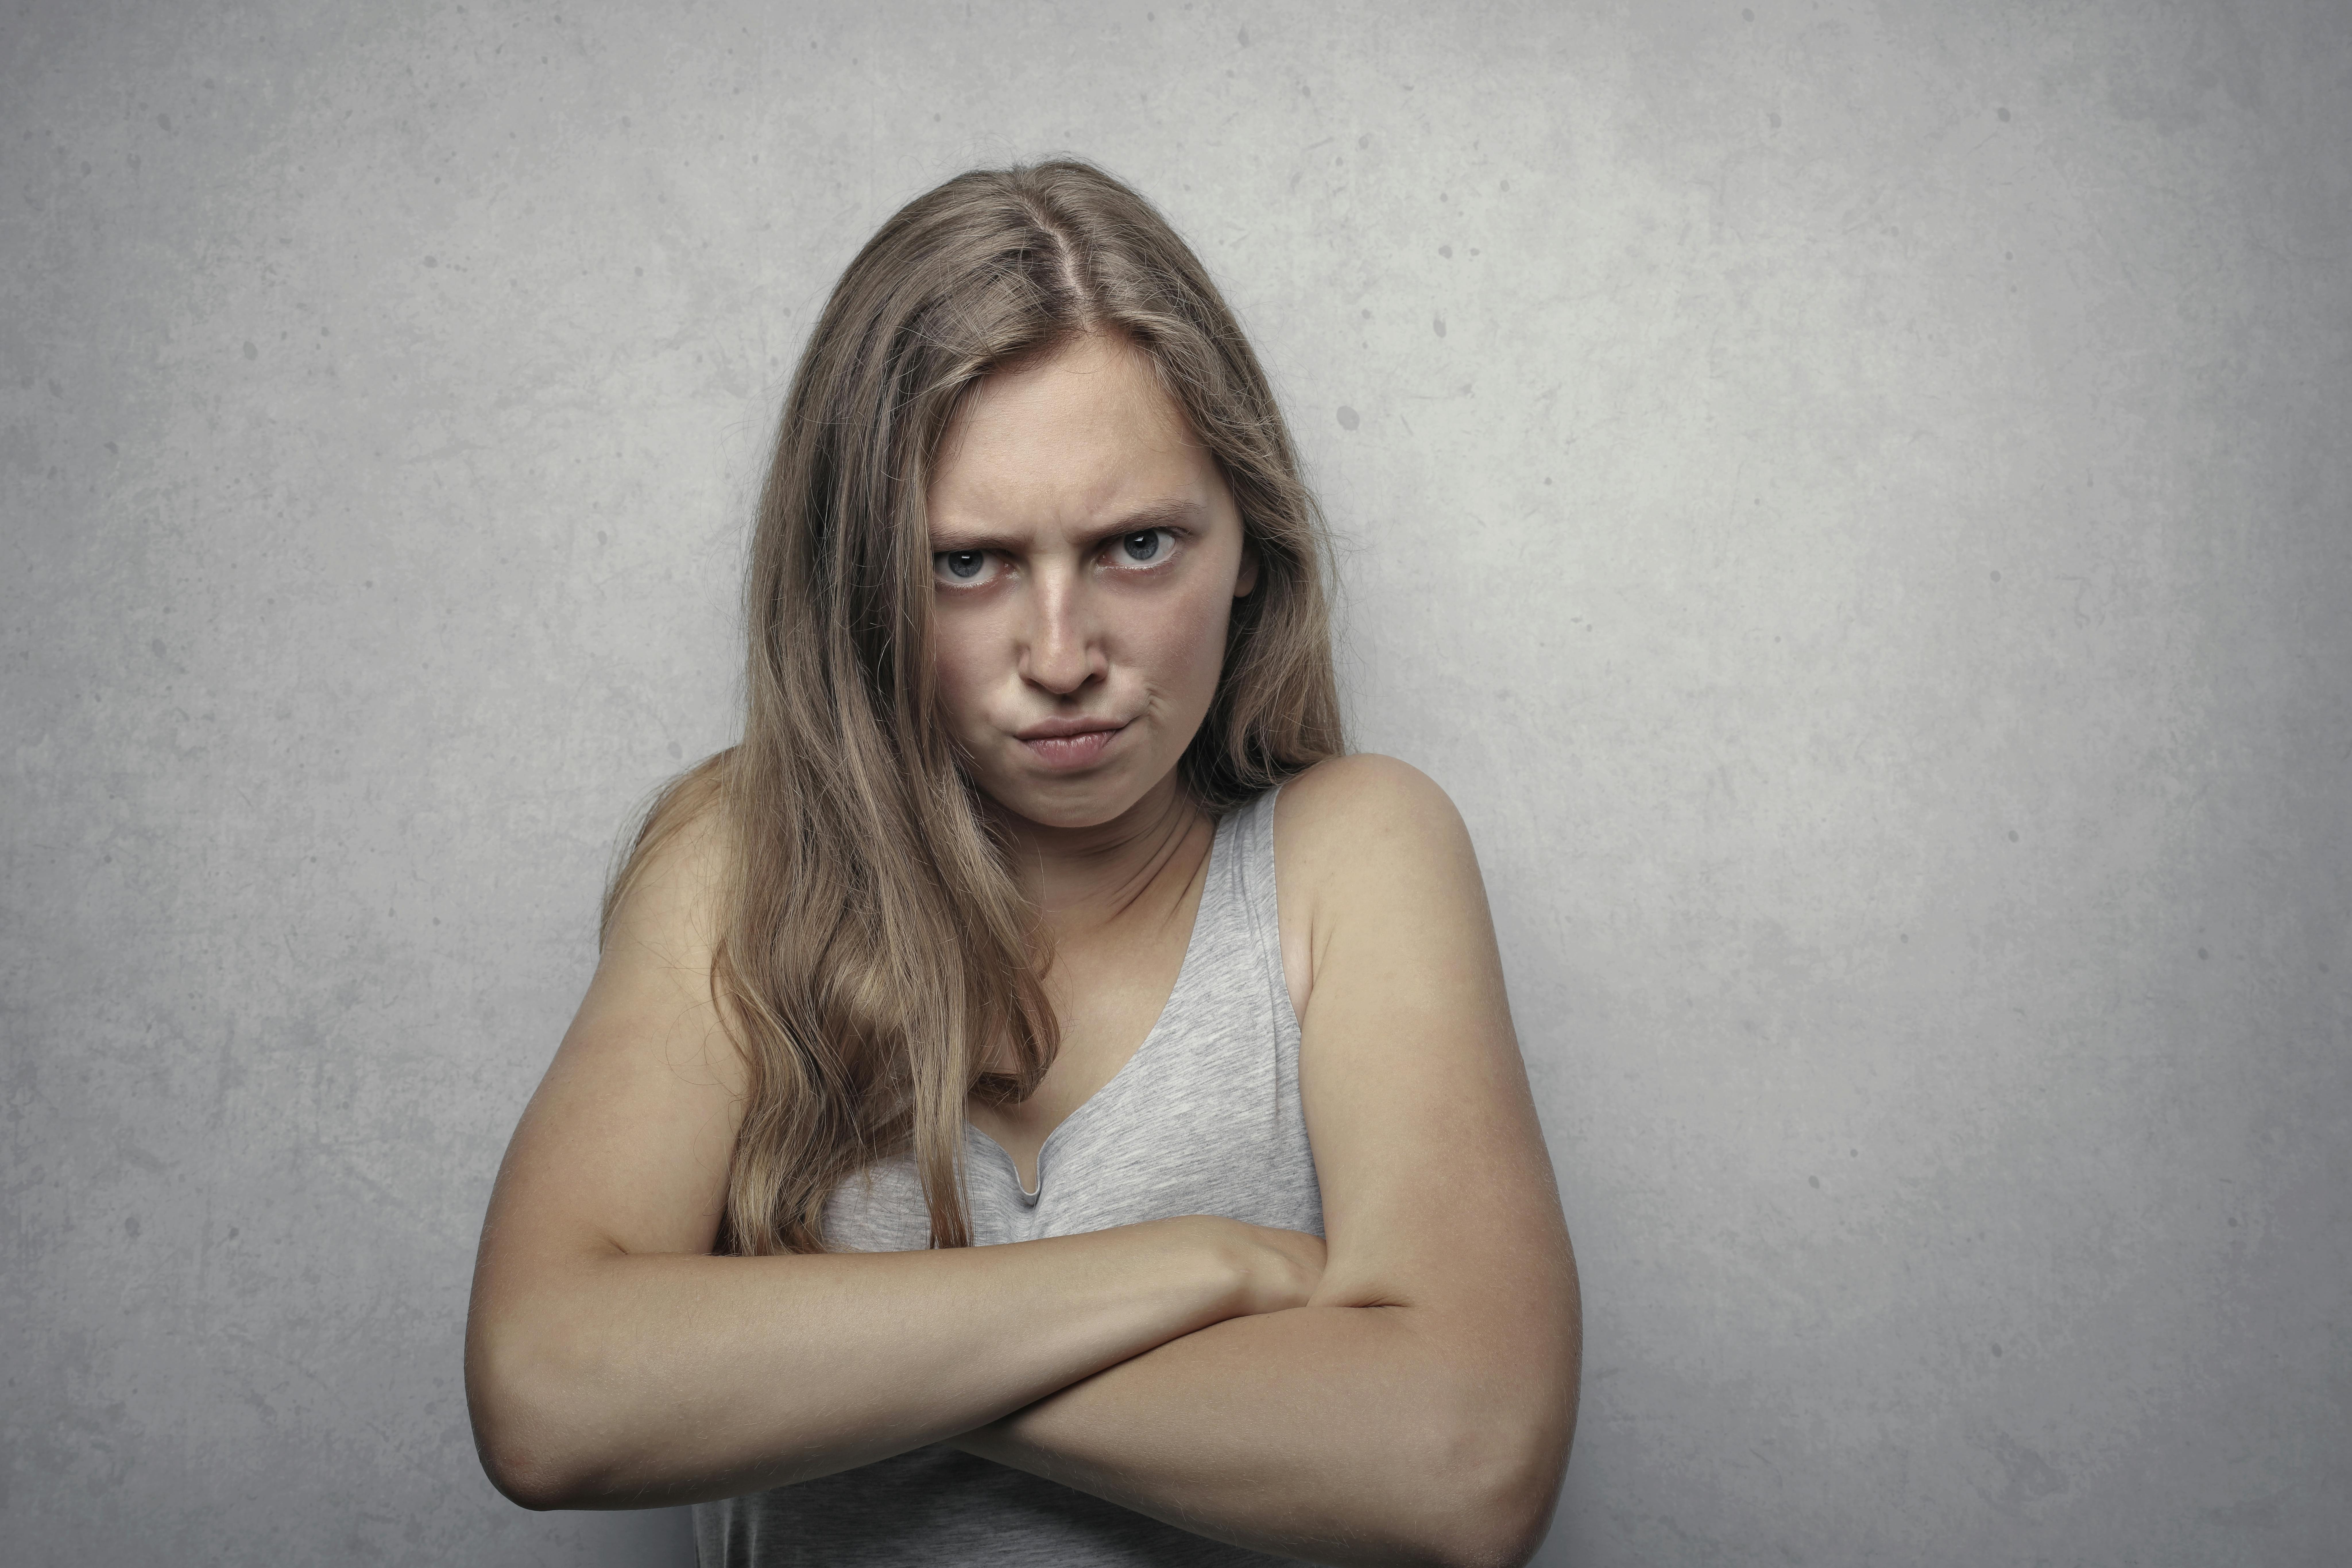 Angry woman with her arms folded | Source: Pexels